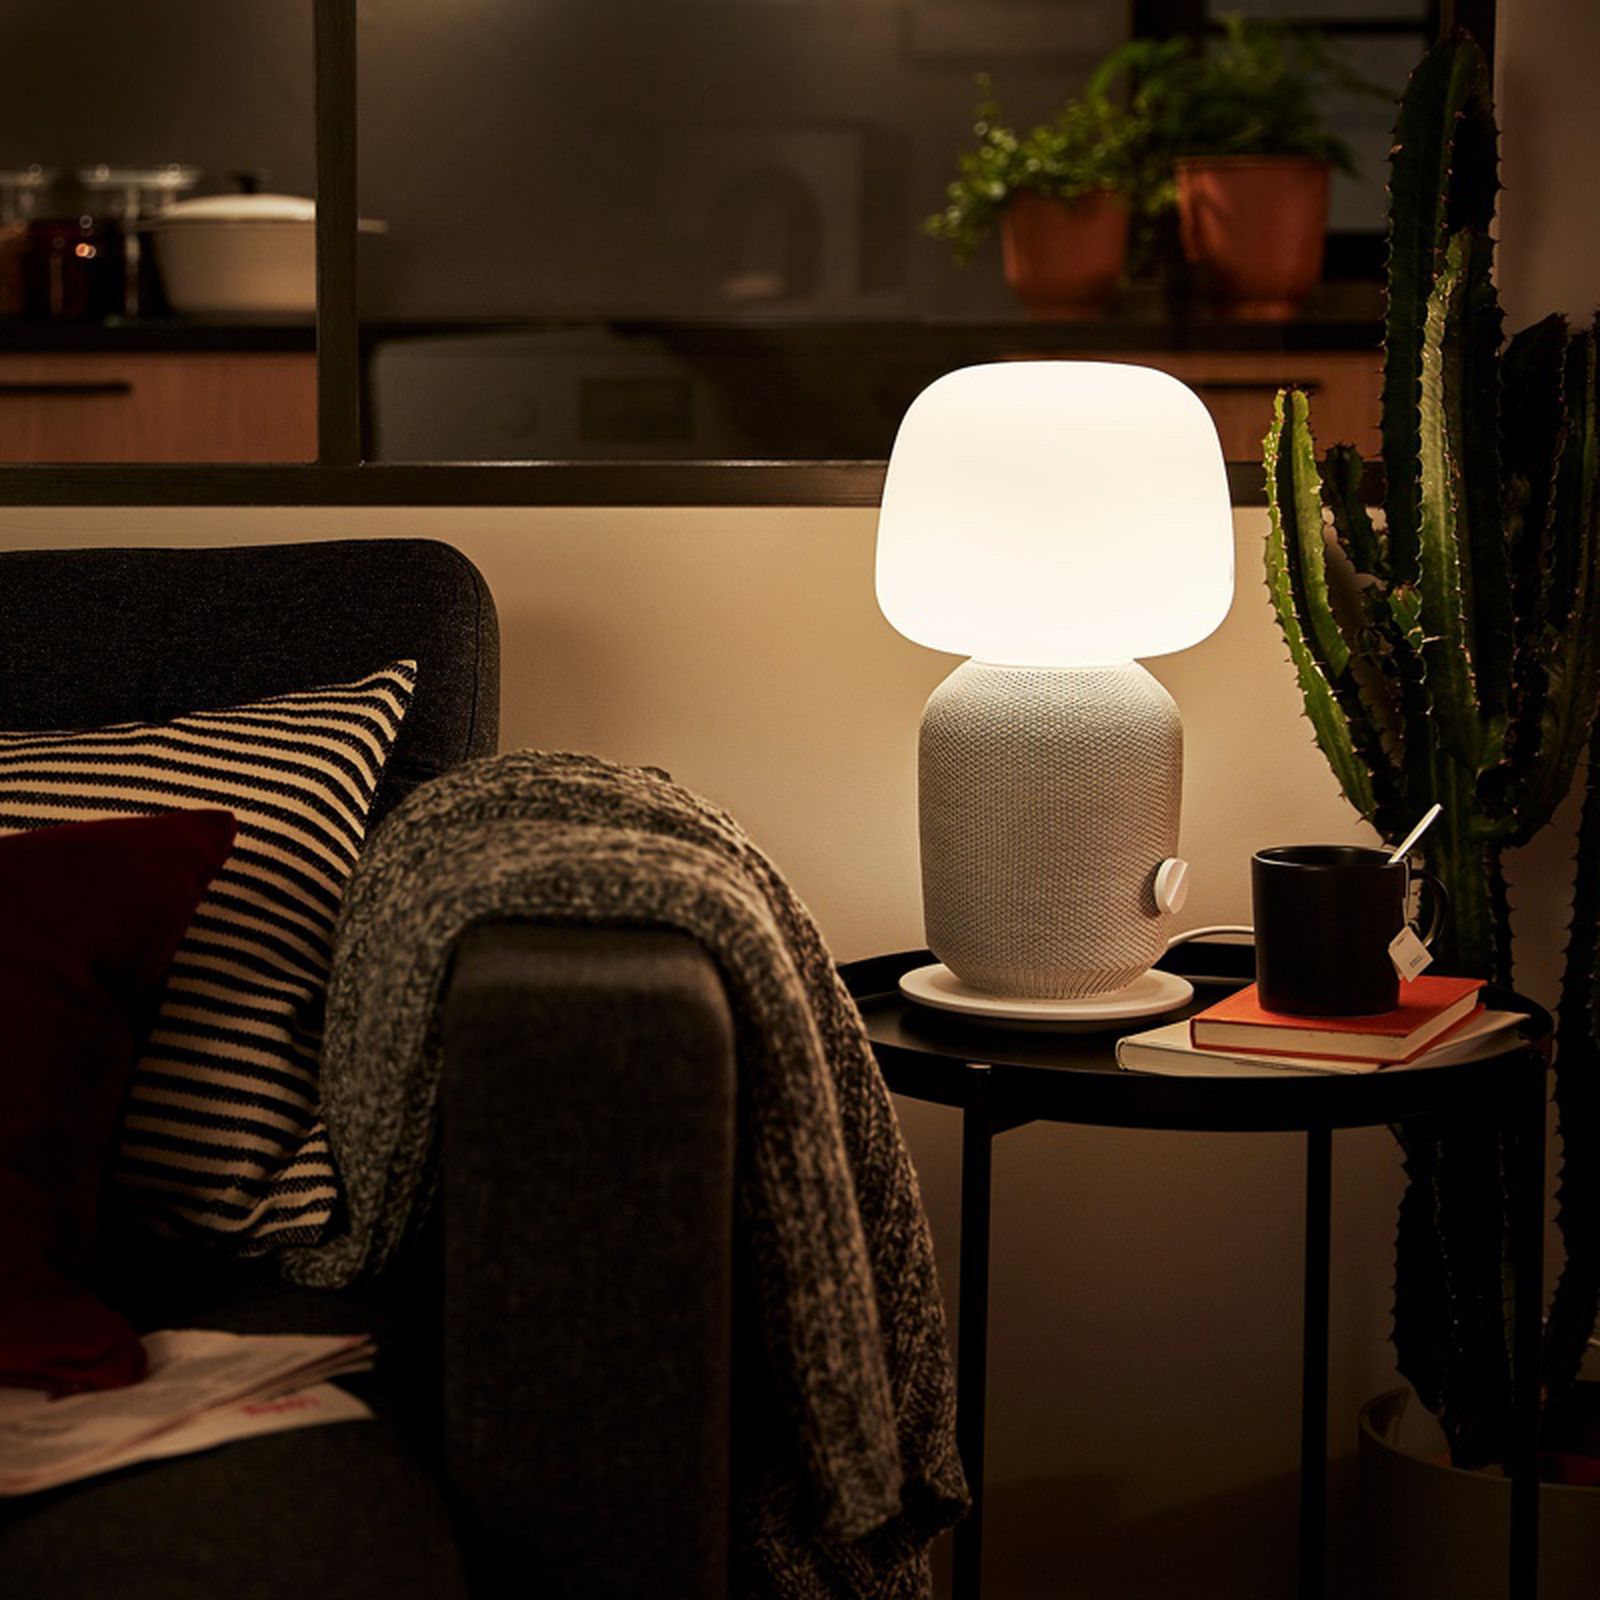 Ikea S New Symfonisk Sonos Speakers With Airplay 2 Now Available